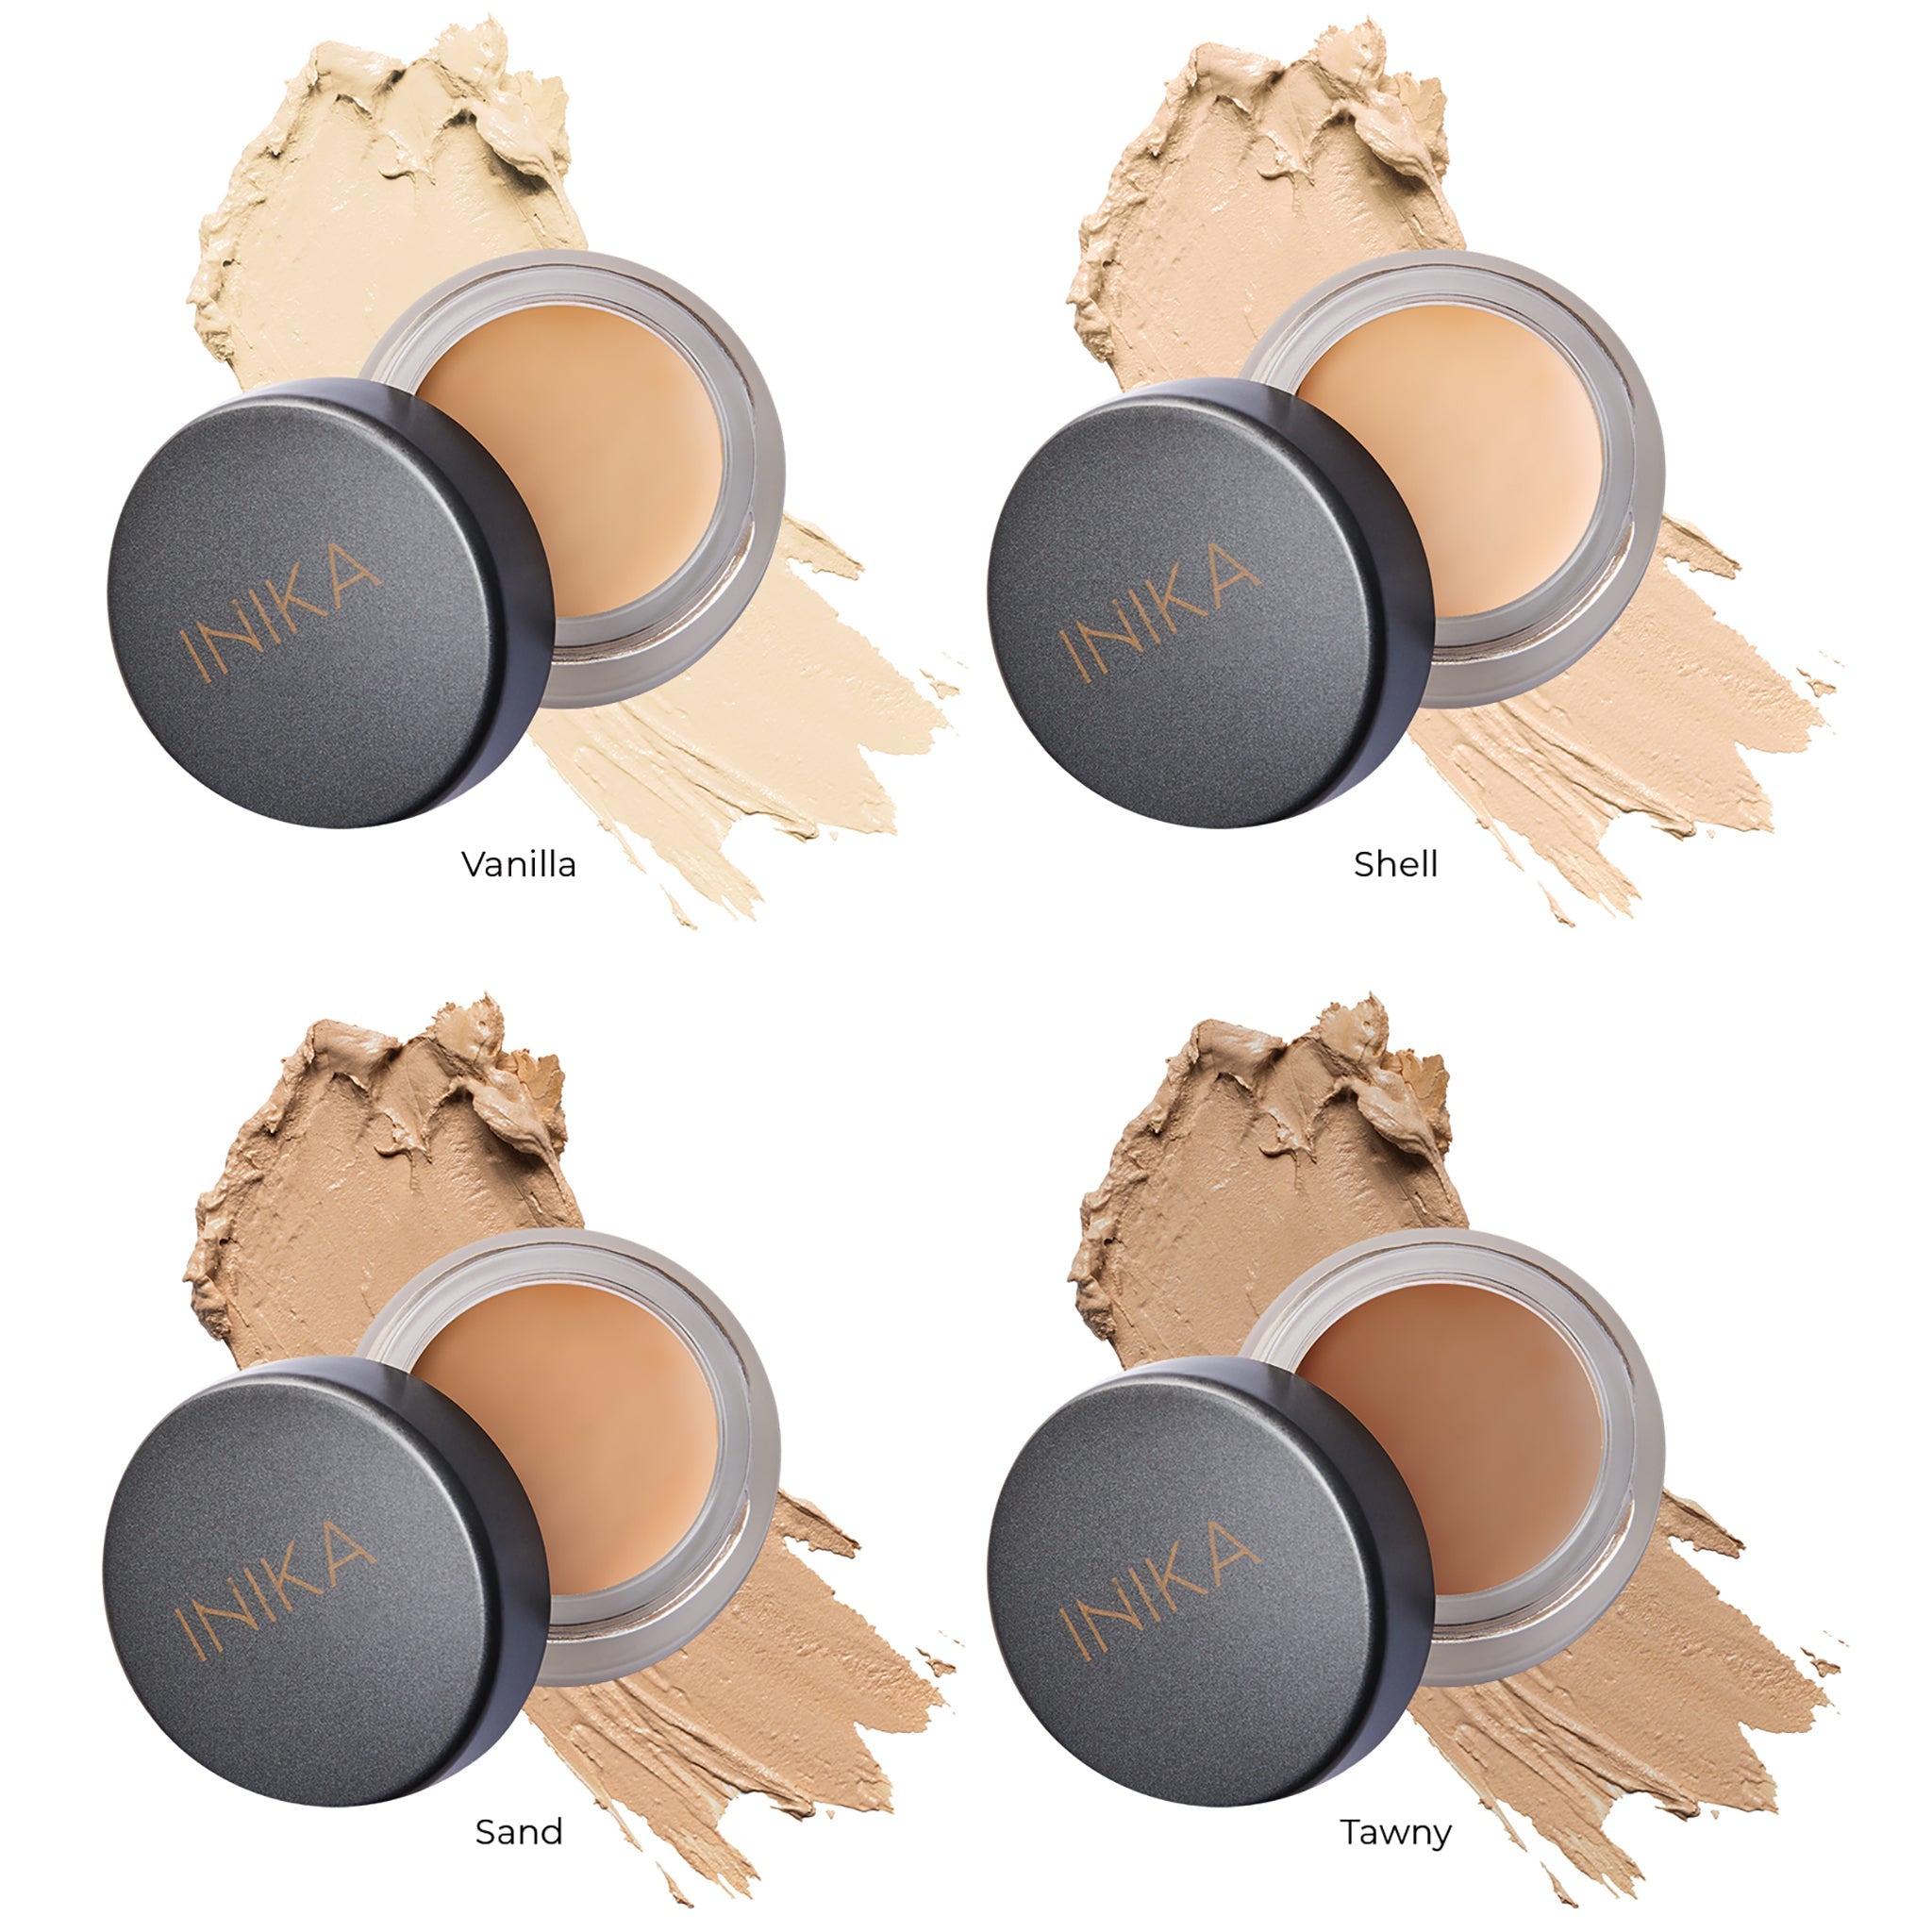 Full Coverage Concealer - by Inika